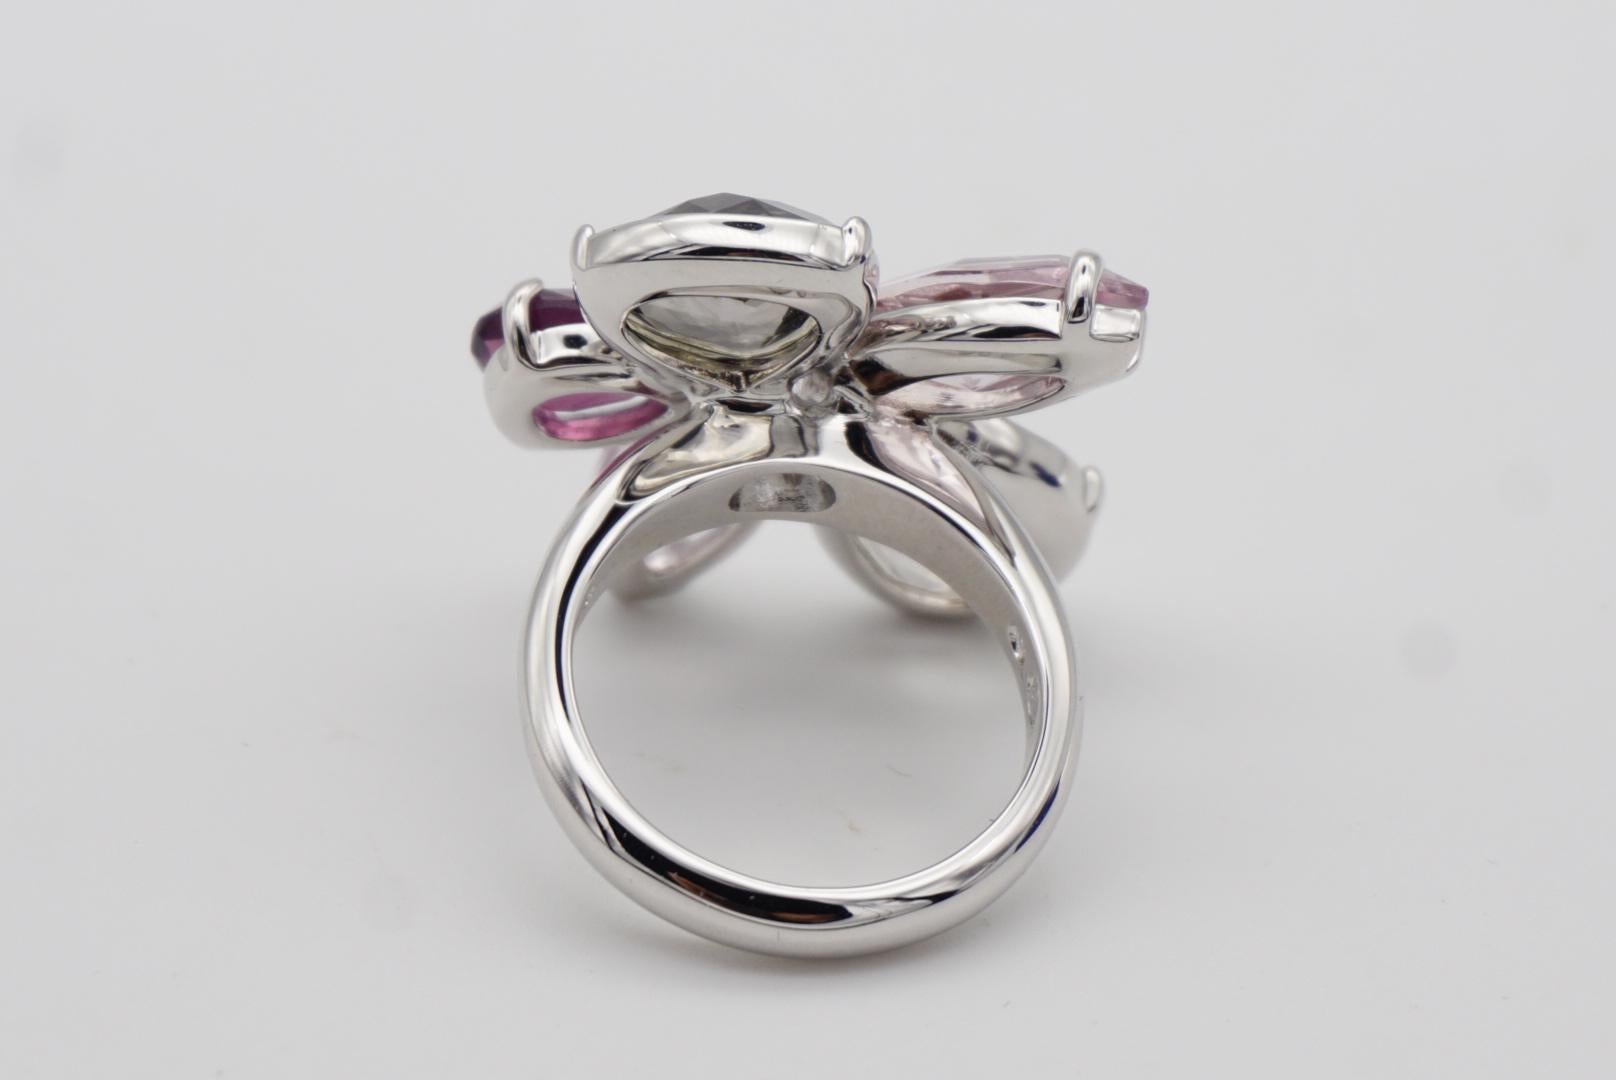 Swarovski Nirvana Cocktail Purple Clear Flower Ring, Silver, Size 58, UK P / Q For Sale 1